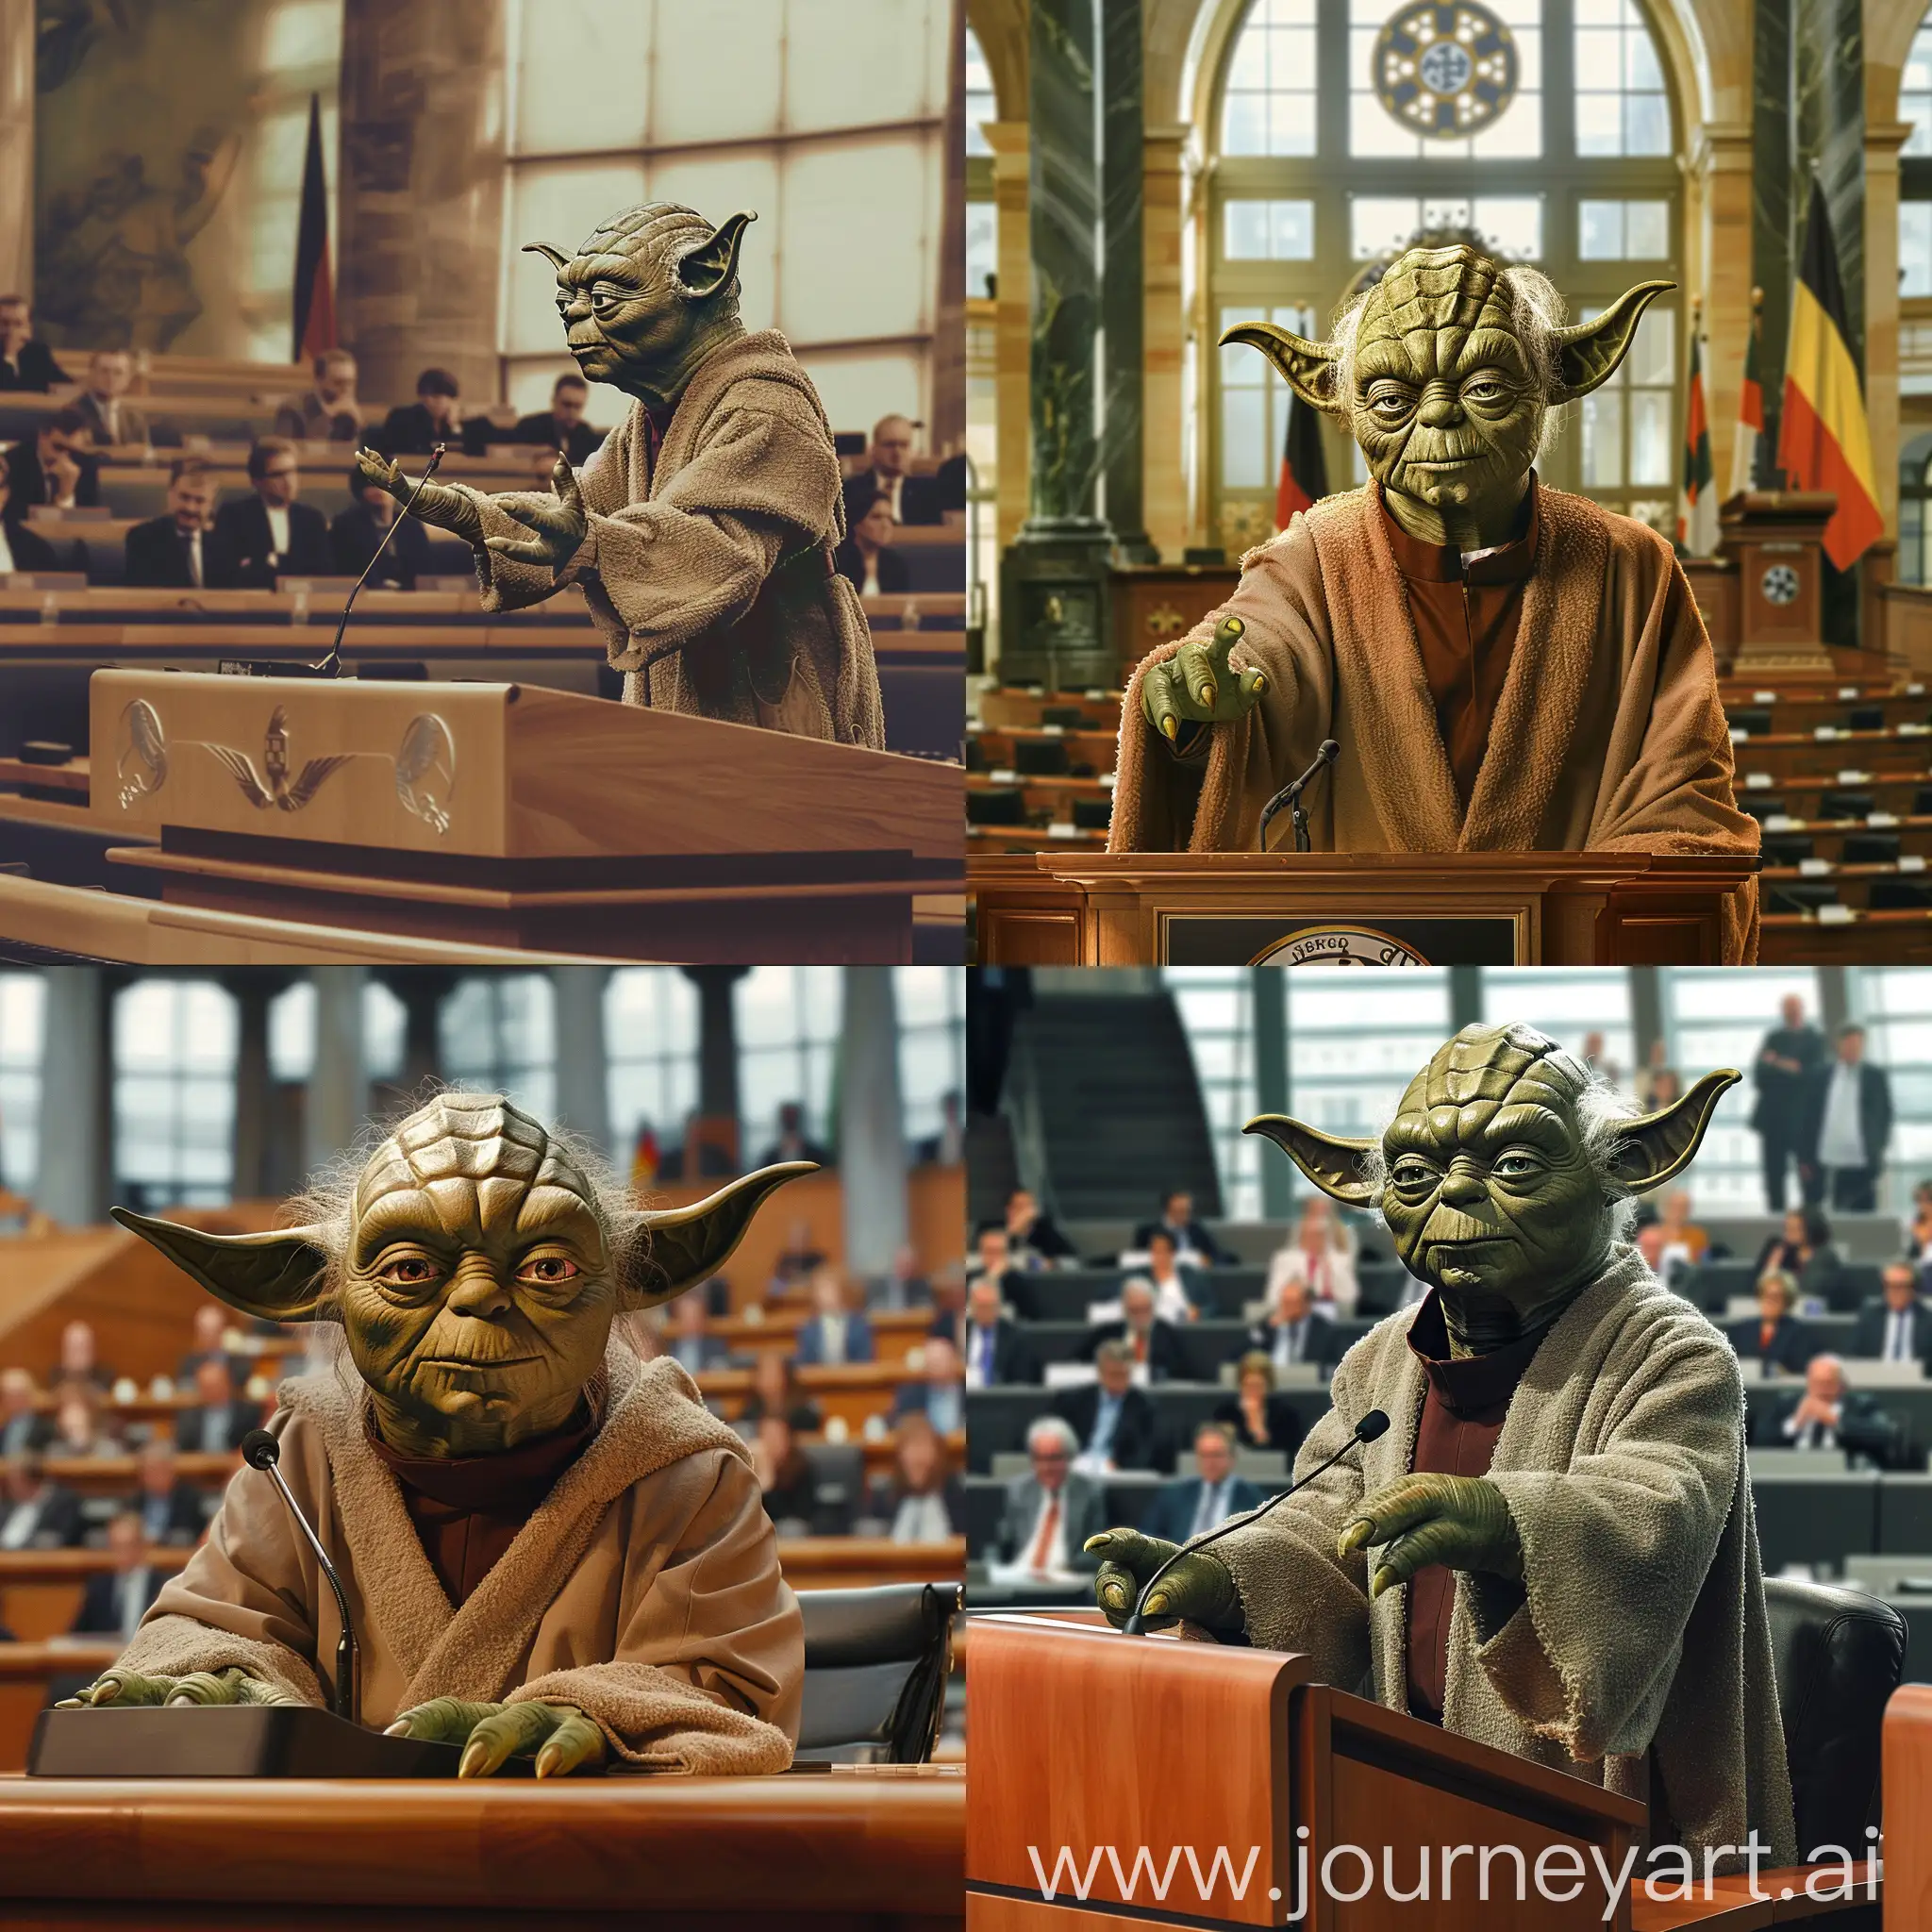 a creature, similar looking to Master Yoda, giving a speech in front of the German parliament.